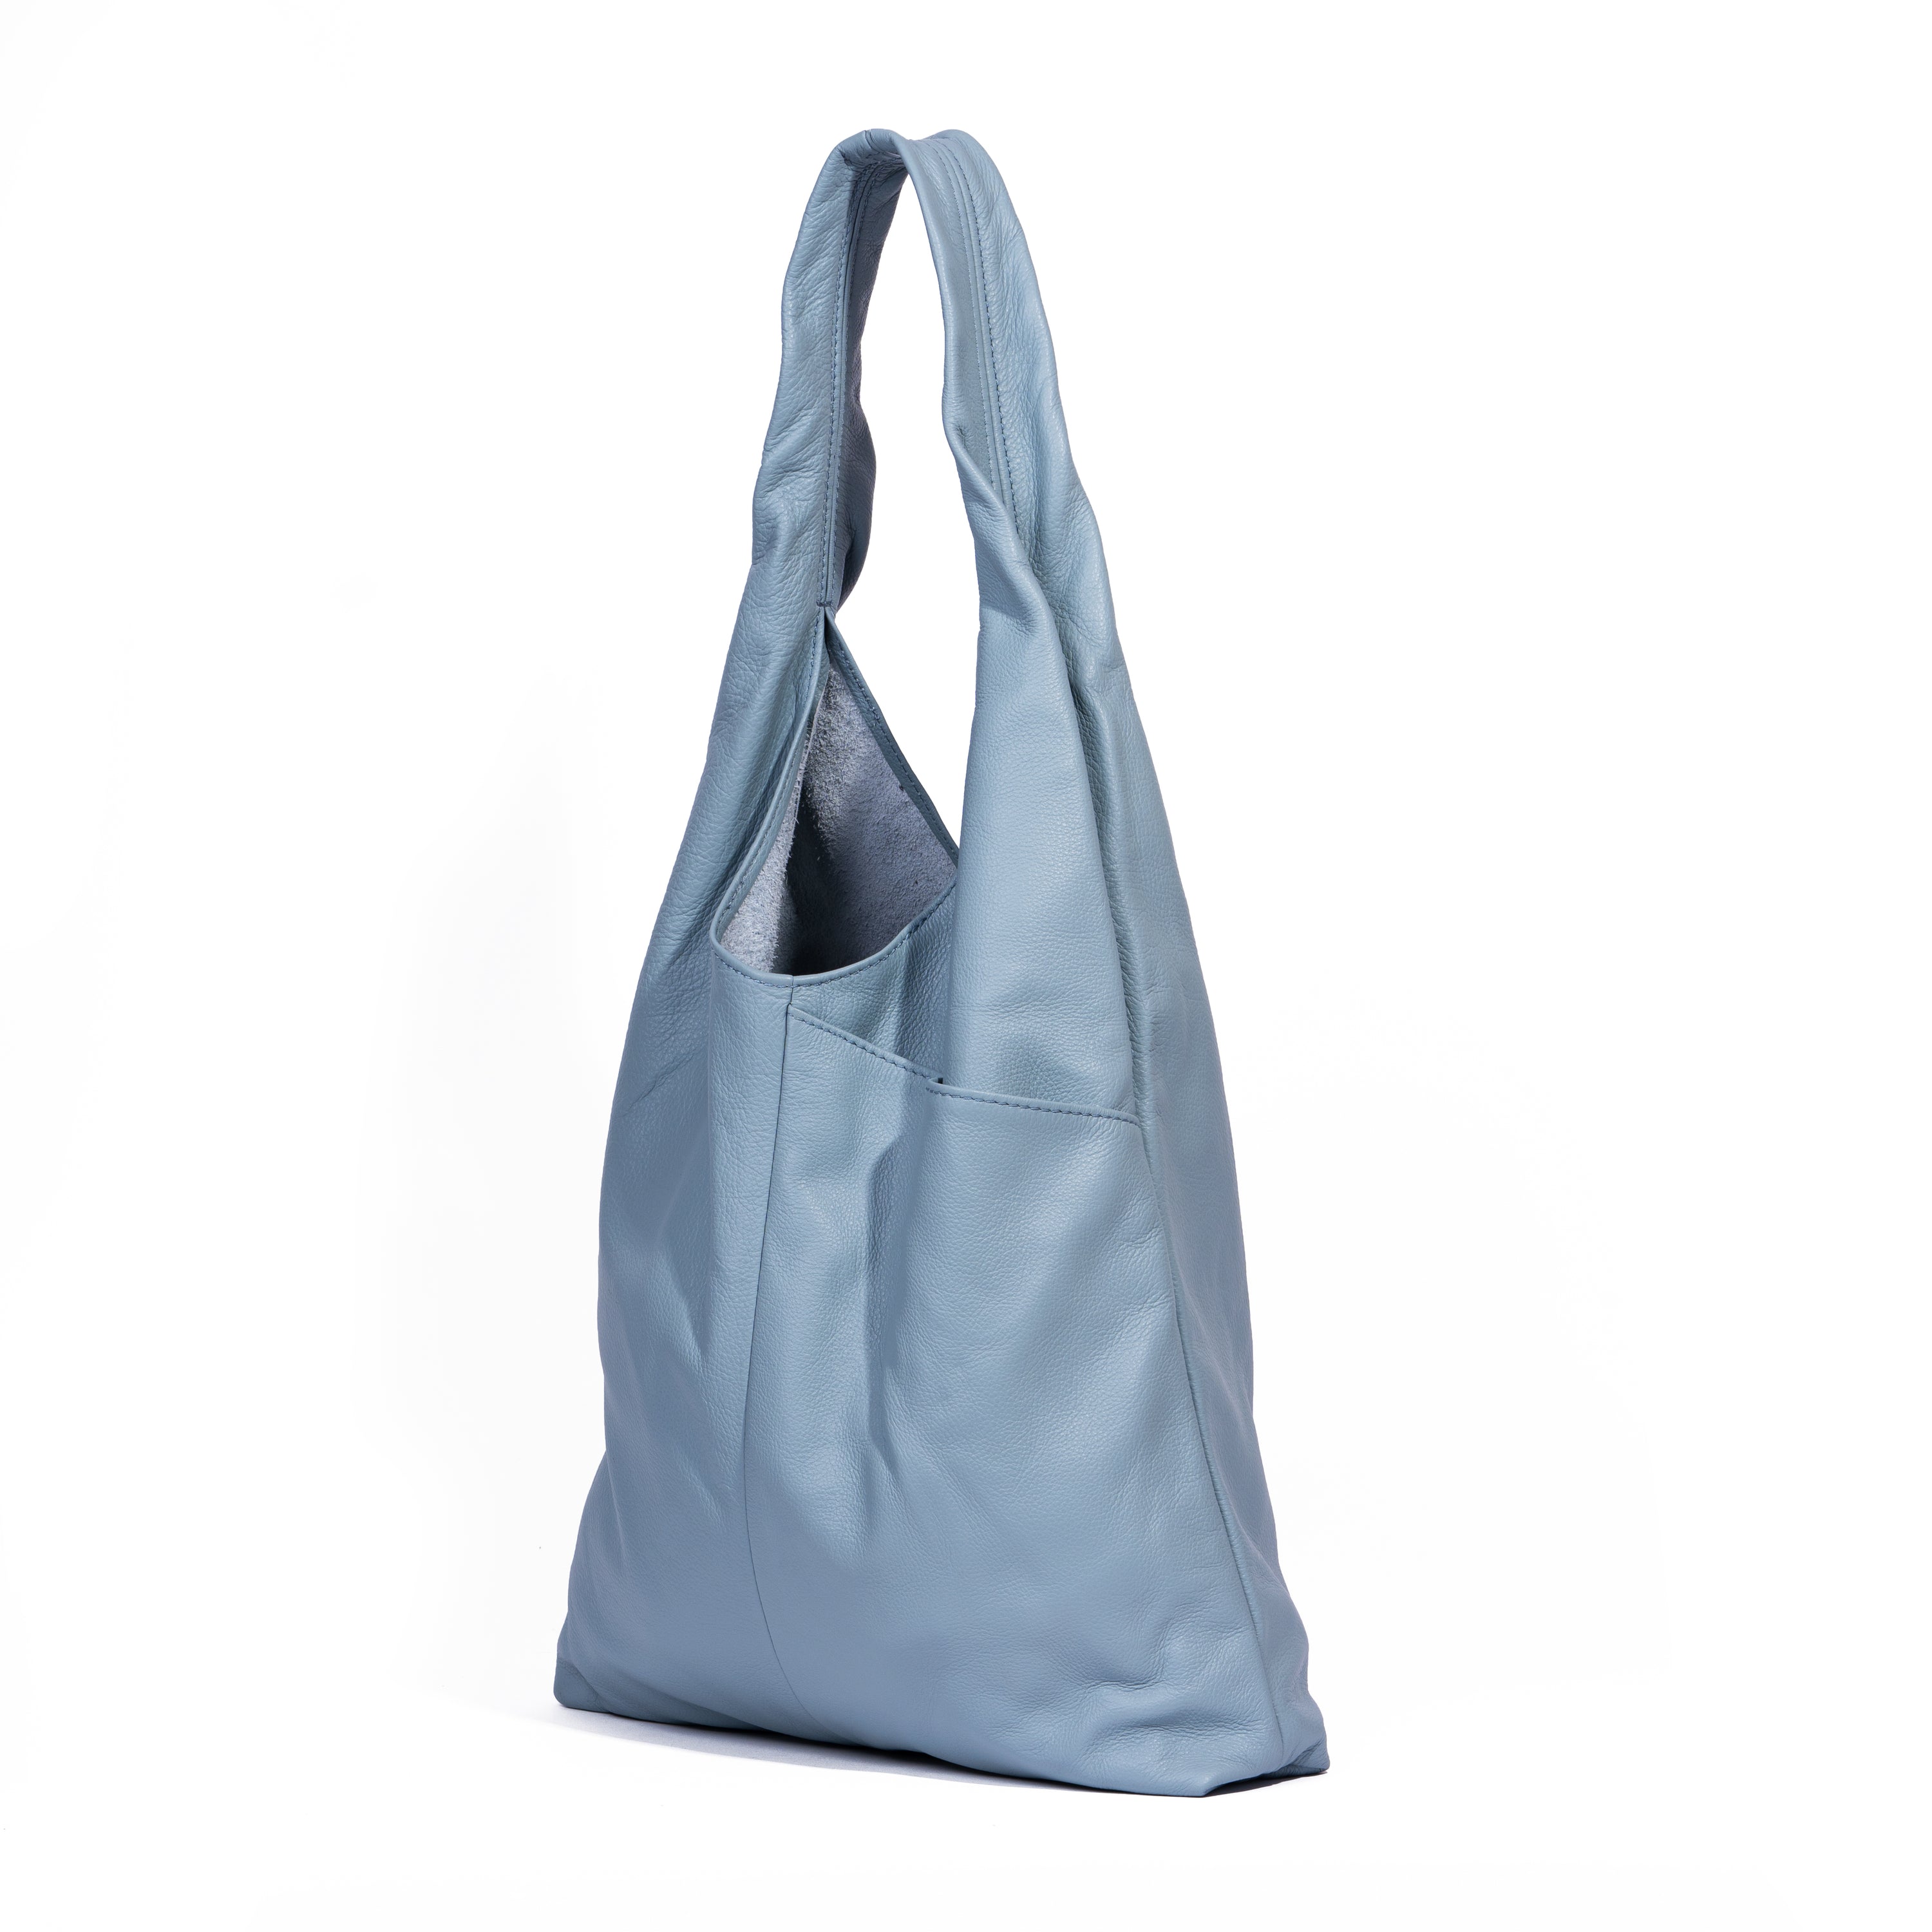 Precious Bag Blue Metallic Leather - Bags from Moda in Pelle UK